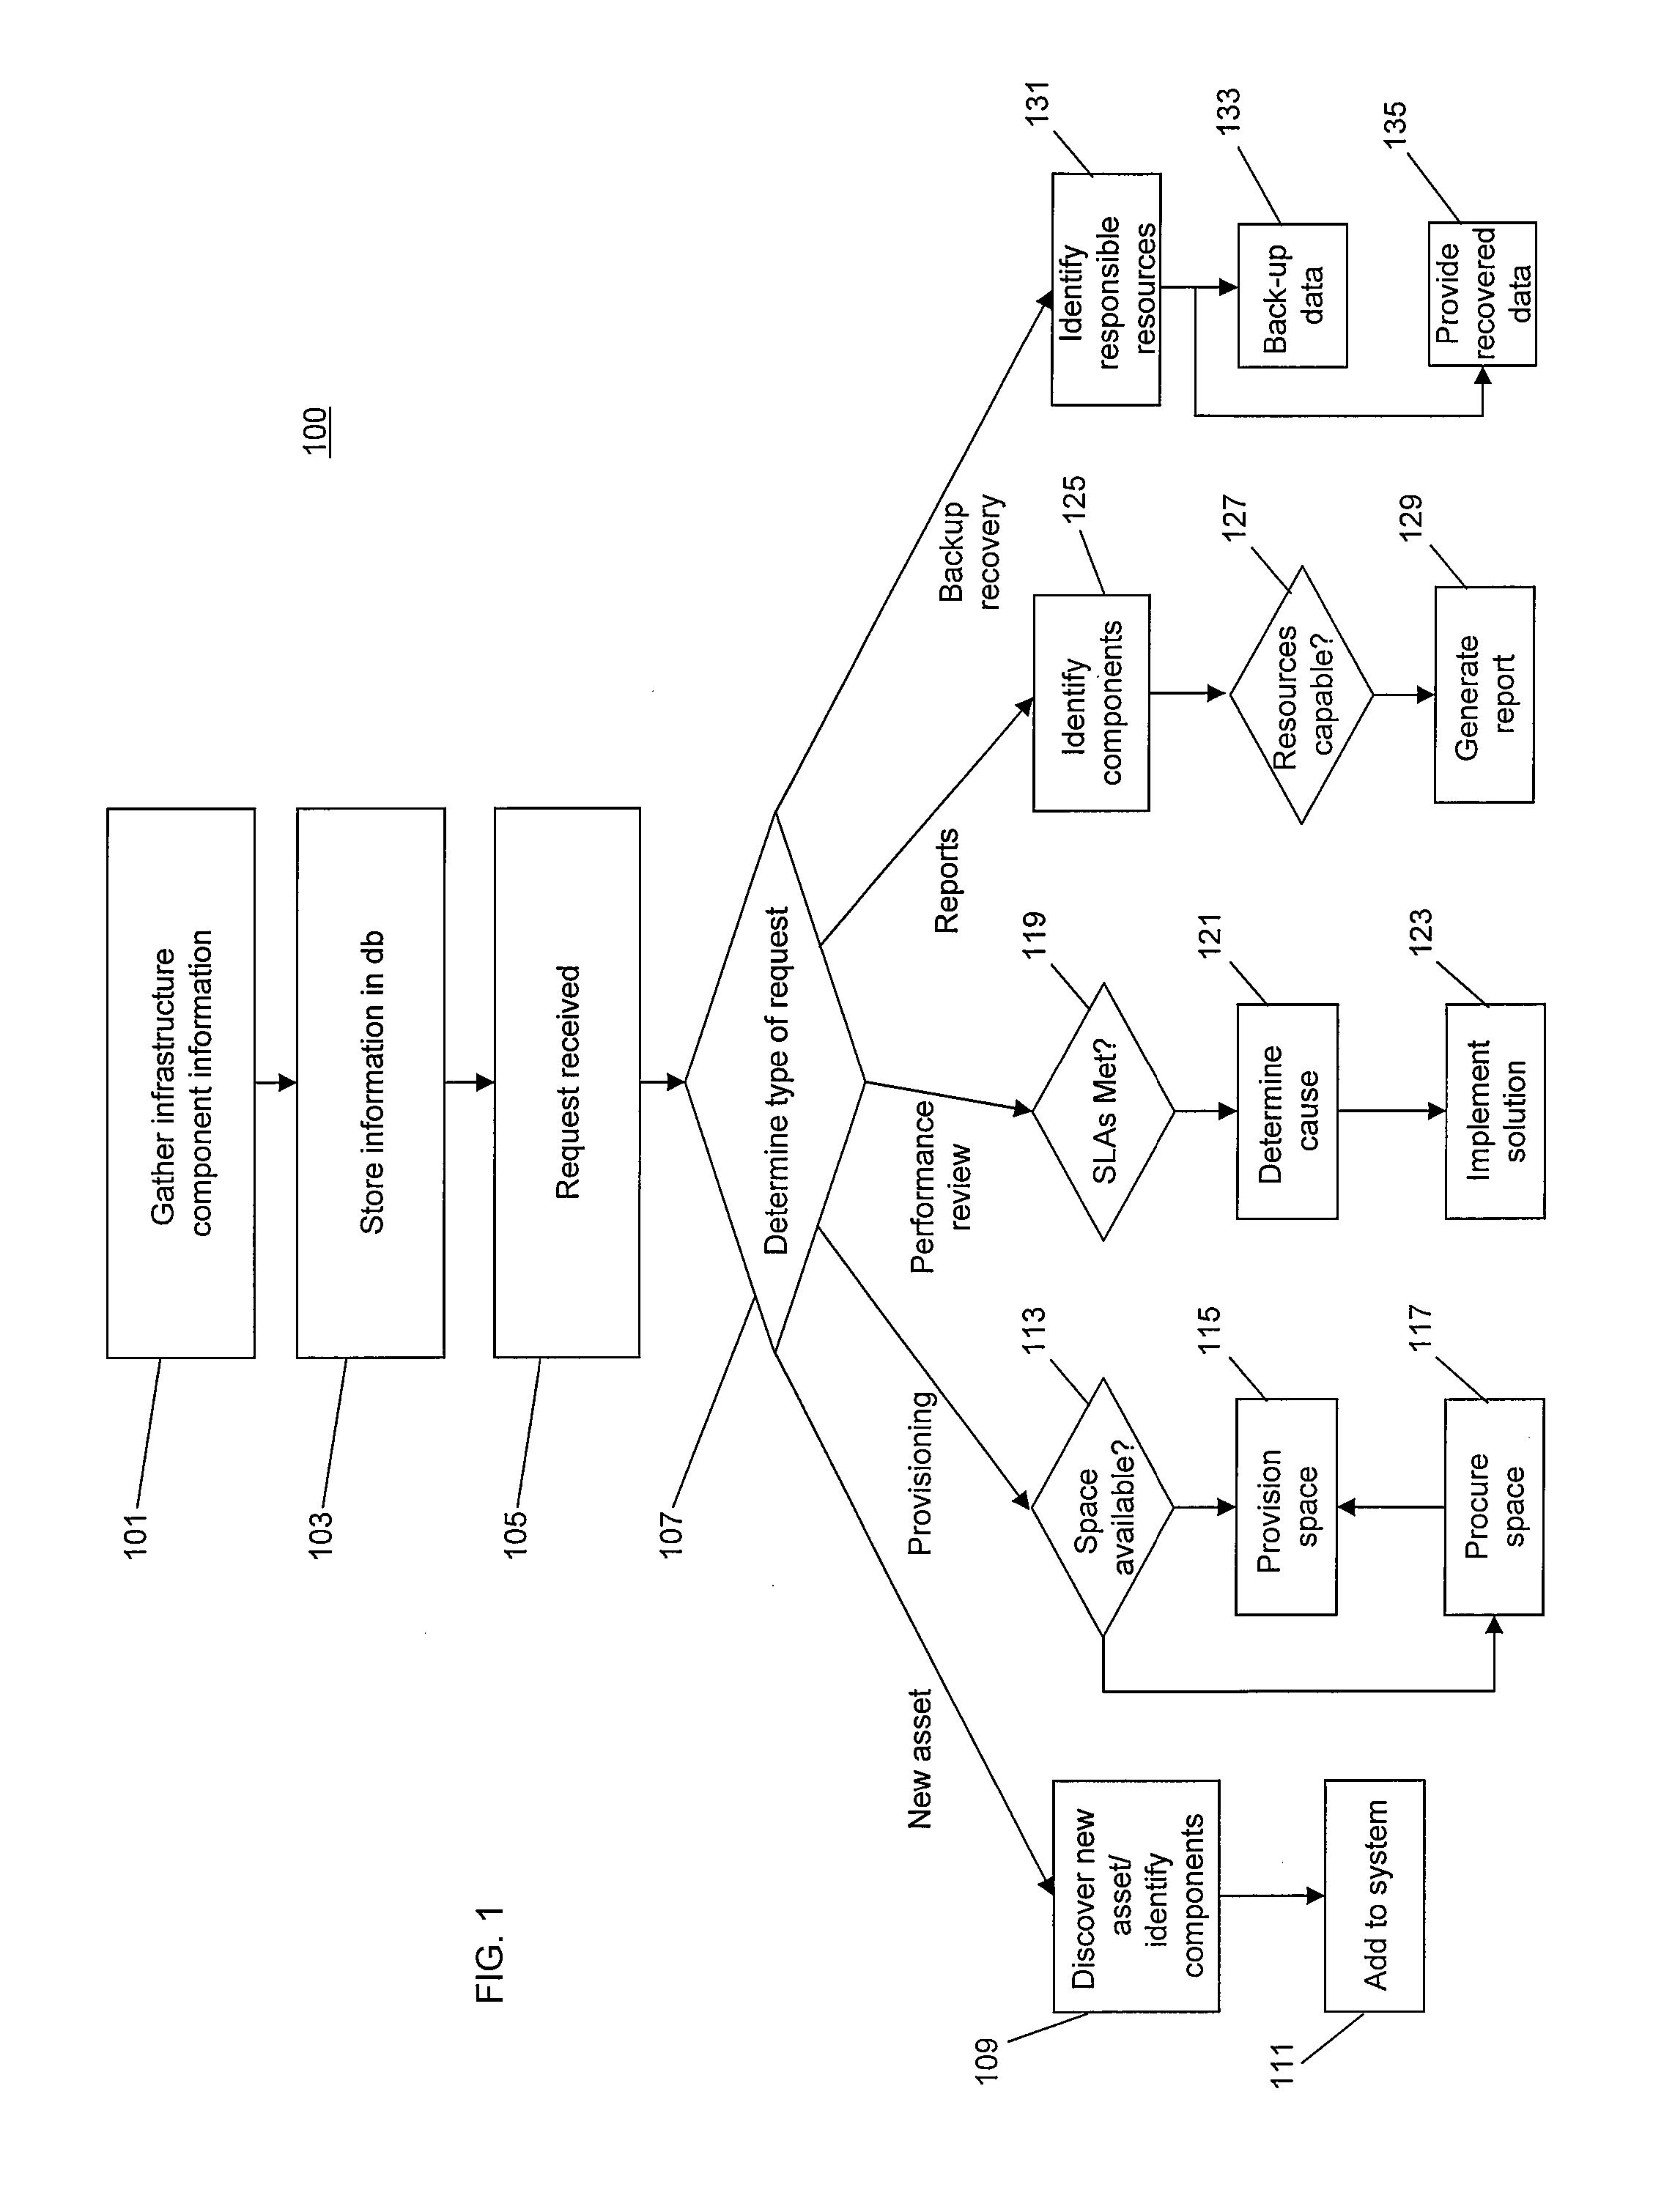 System and method for optimizing storage infrastructure performance